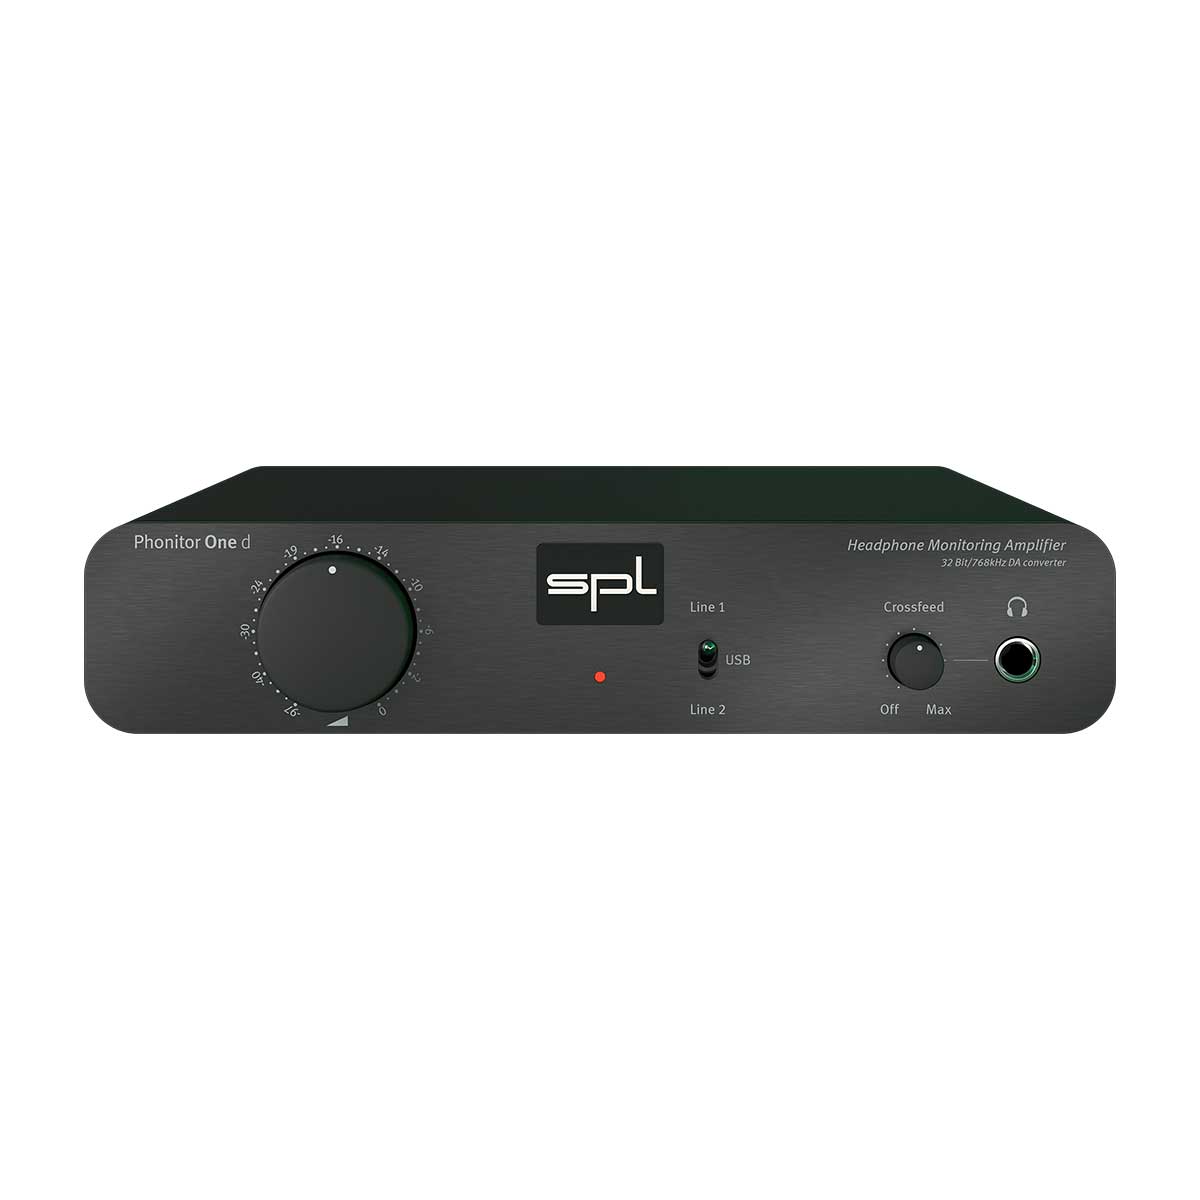 SPL Phonitor One D Audiophile Headphone Amplifier with innovative Phonitor Matrix, 32-bit DA-converter and outstanding sound quality